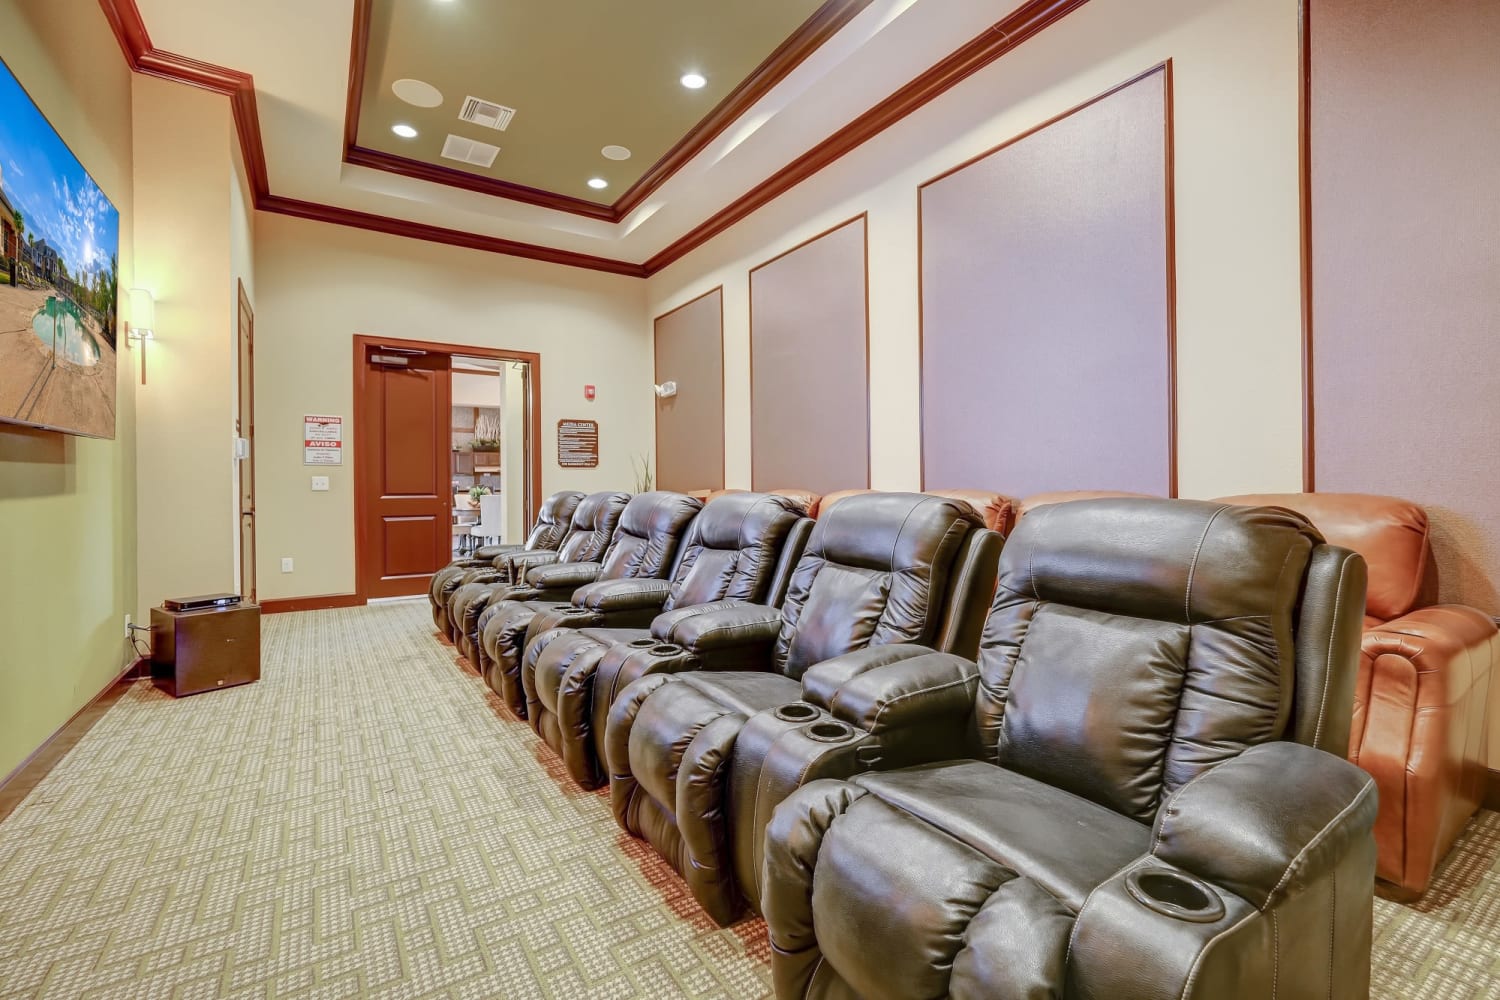 Theatre room with leather recliners and big screen tv at Chateau Mirage Apartment Homes in Lafayette, Louisiana